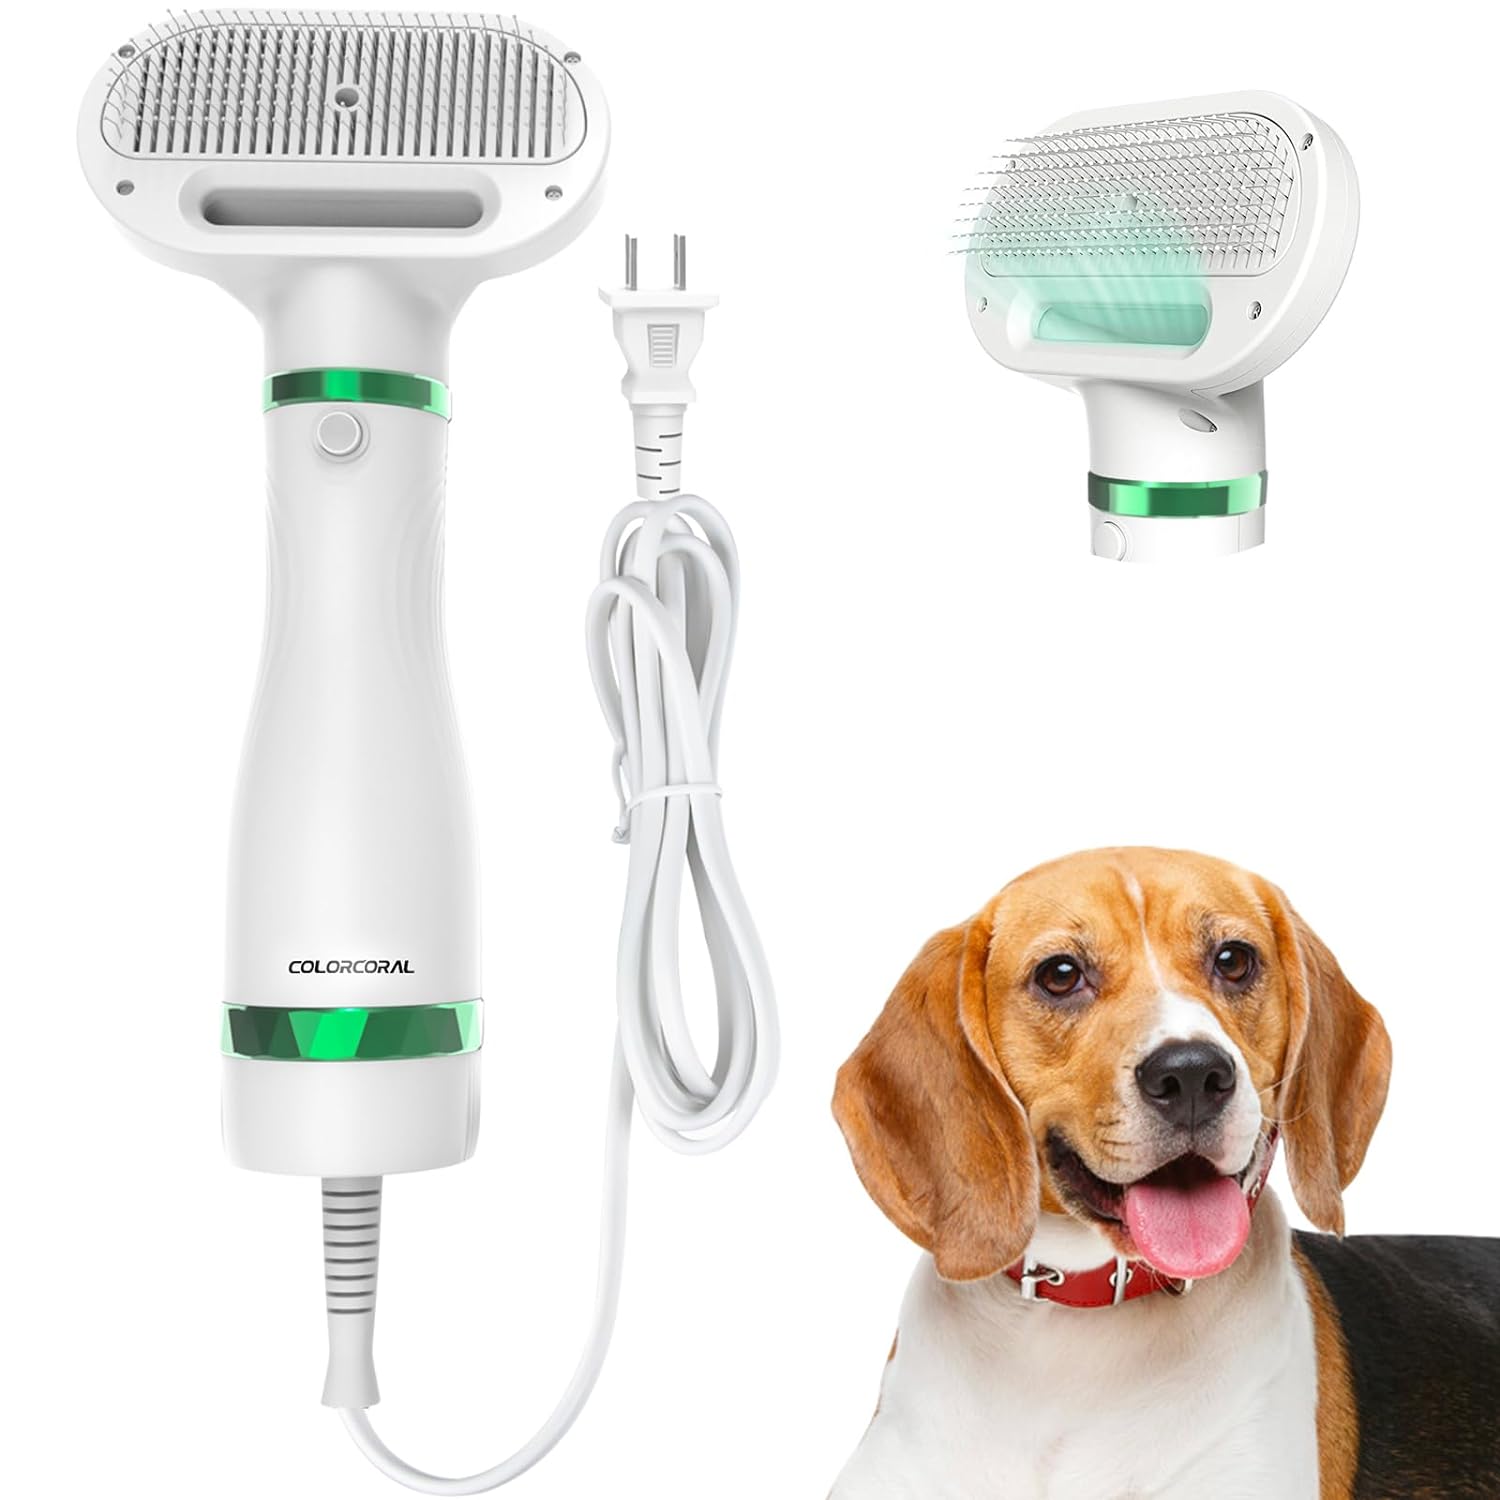 I have 4 fur babies and use to try and hold hand dryer in one hand them between my legs and brush in the other. Thank you so much for the all in one, save on drying time and ease to use. It' not as hot as commercial dryer but it' perfect for sensitive cats. The price wasn't too bad either and performance was excellent. I would recommend for cats.